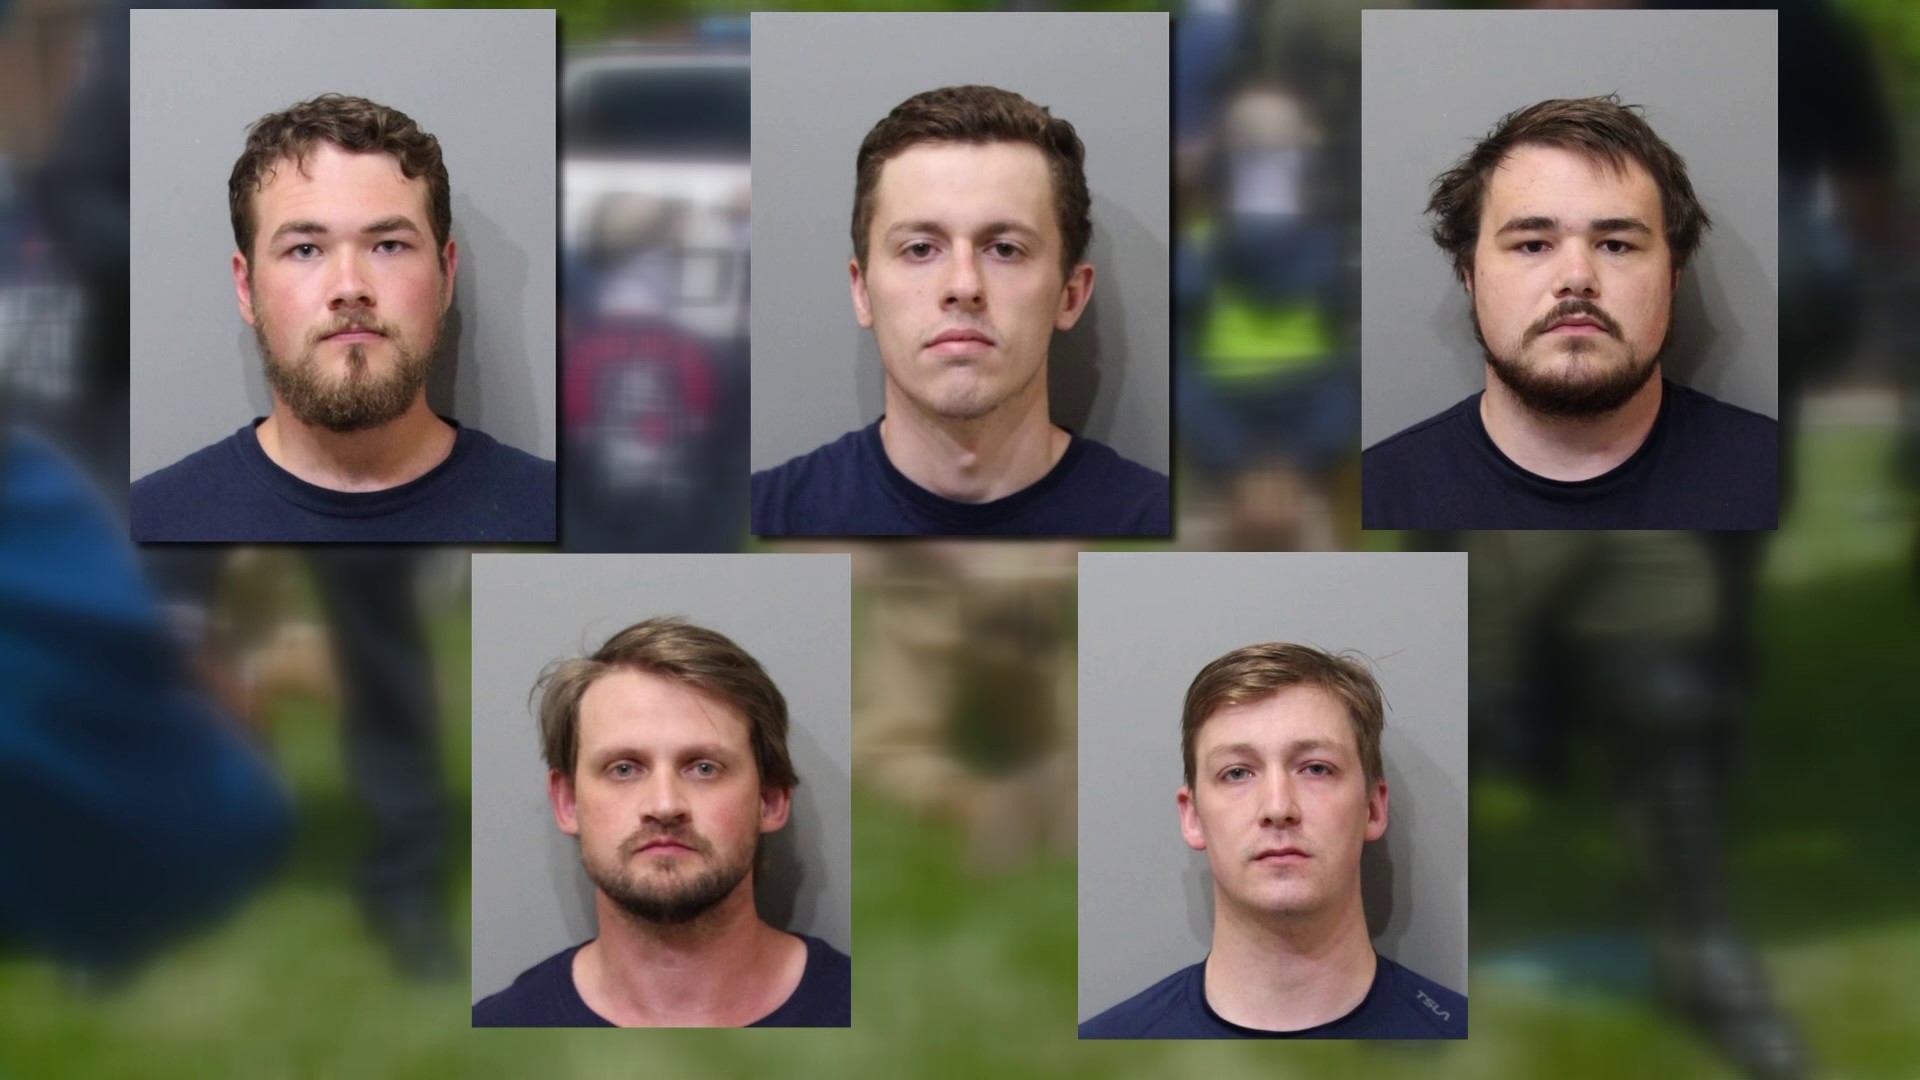 The five men, Devin Center, Forrest Rankin, Robert Whitted, James J. Johnson and Derek Smith, have all previously pleaded not guilty to conspiracy to riot.